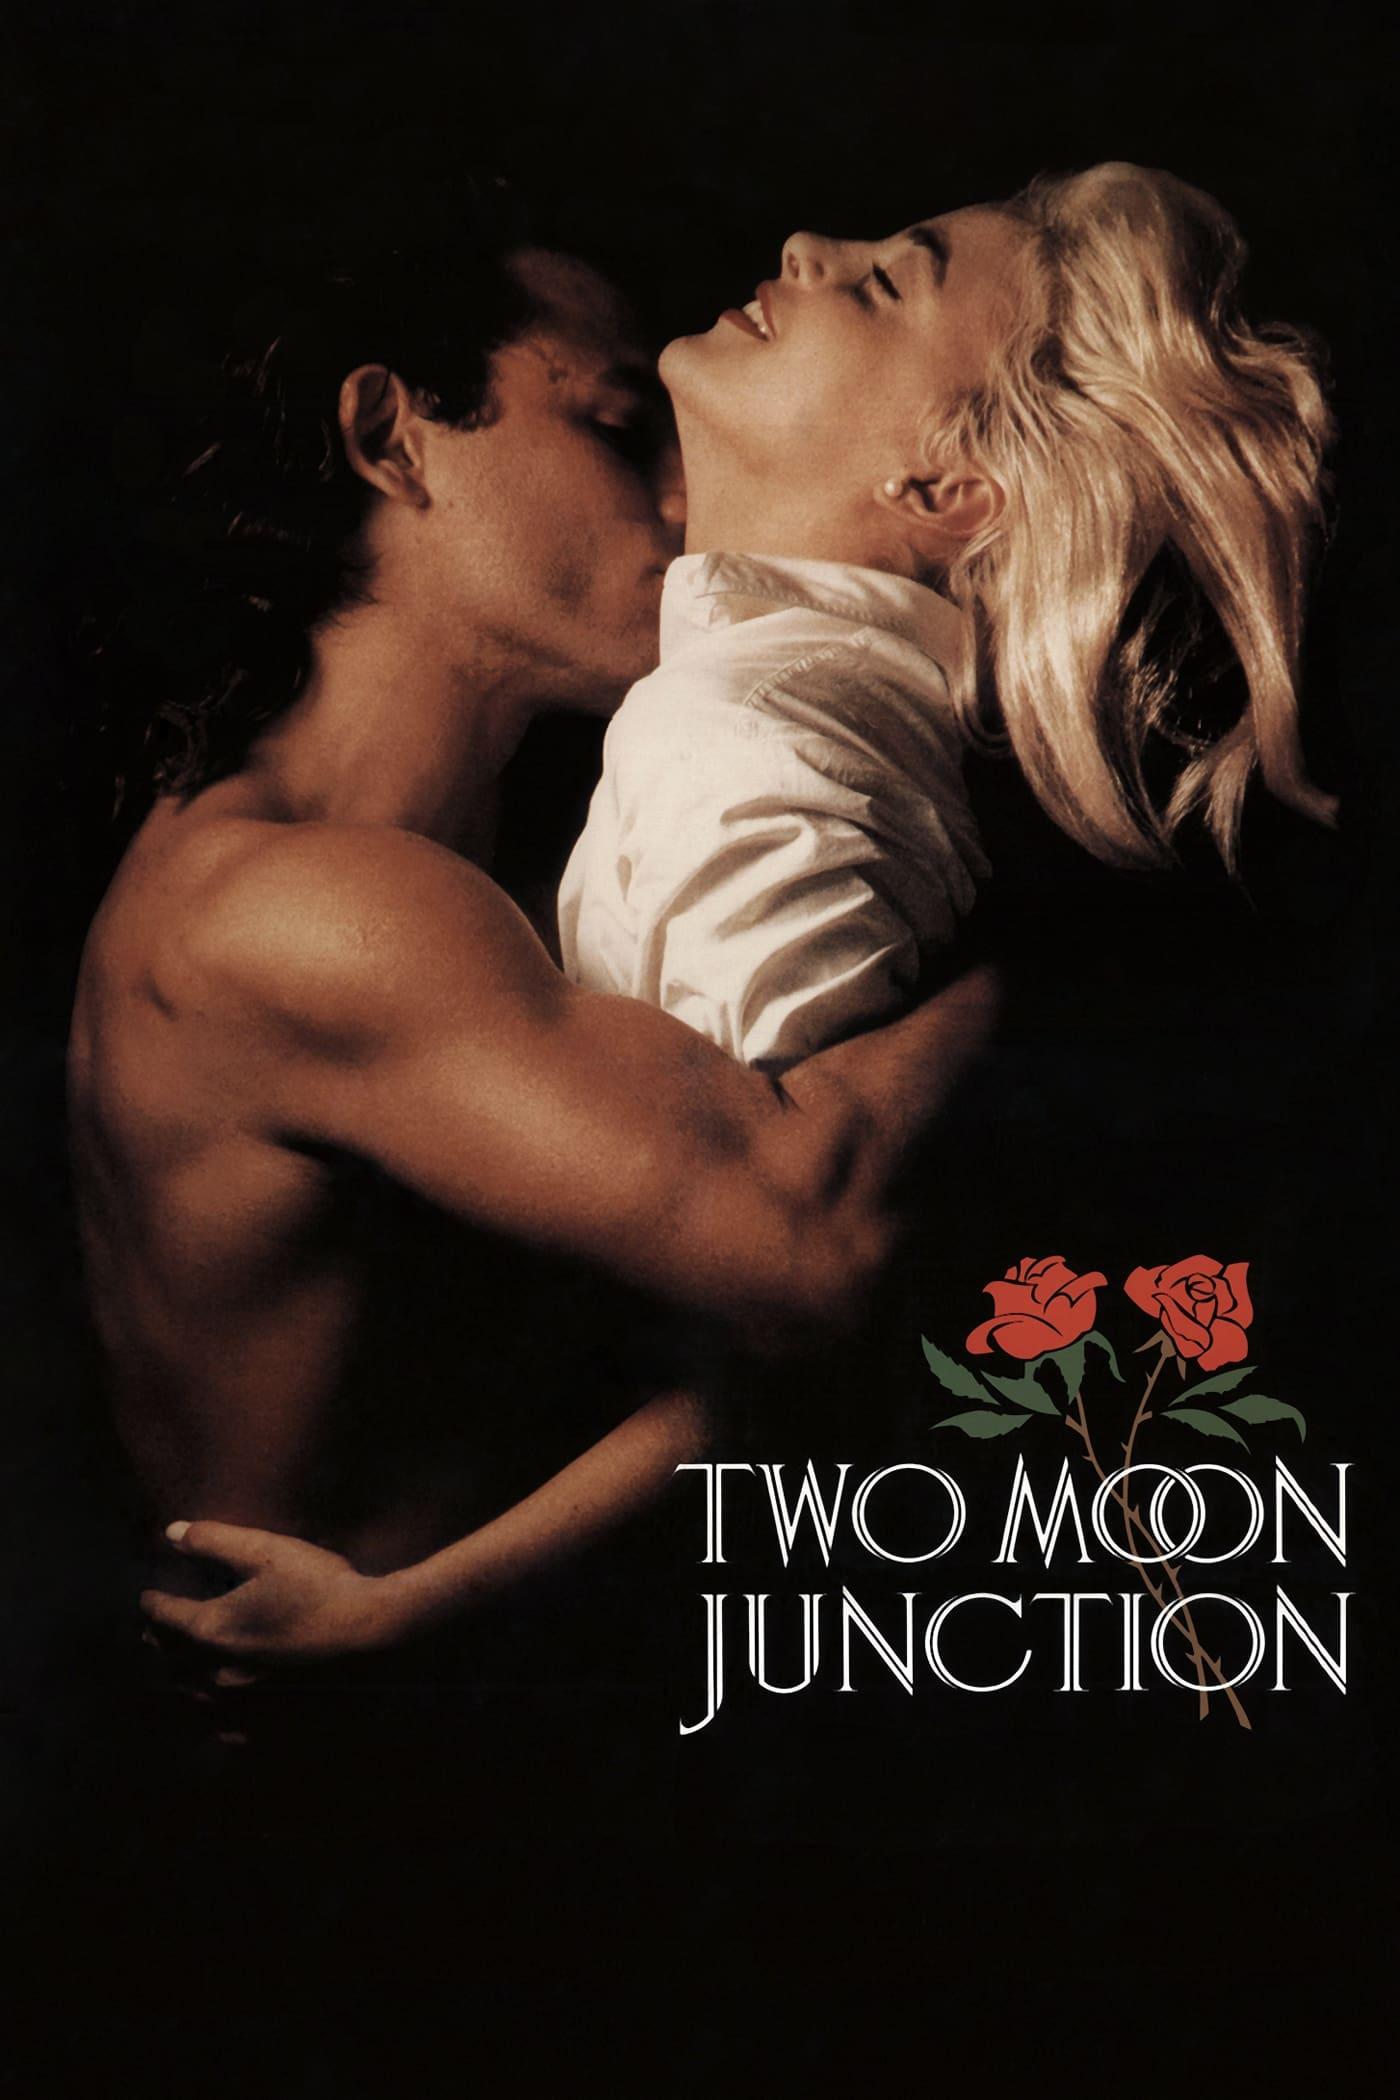 Two Moon Junction poster